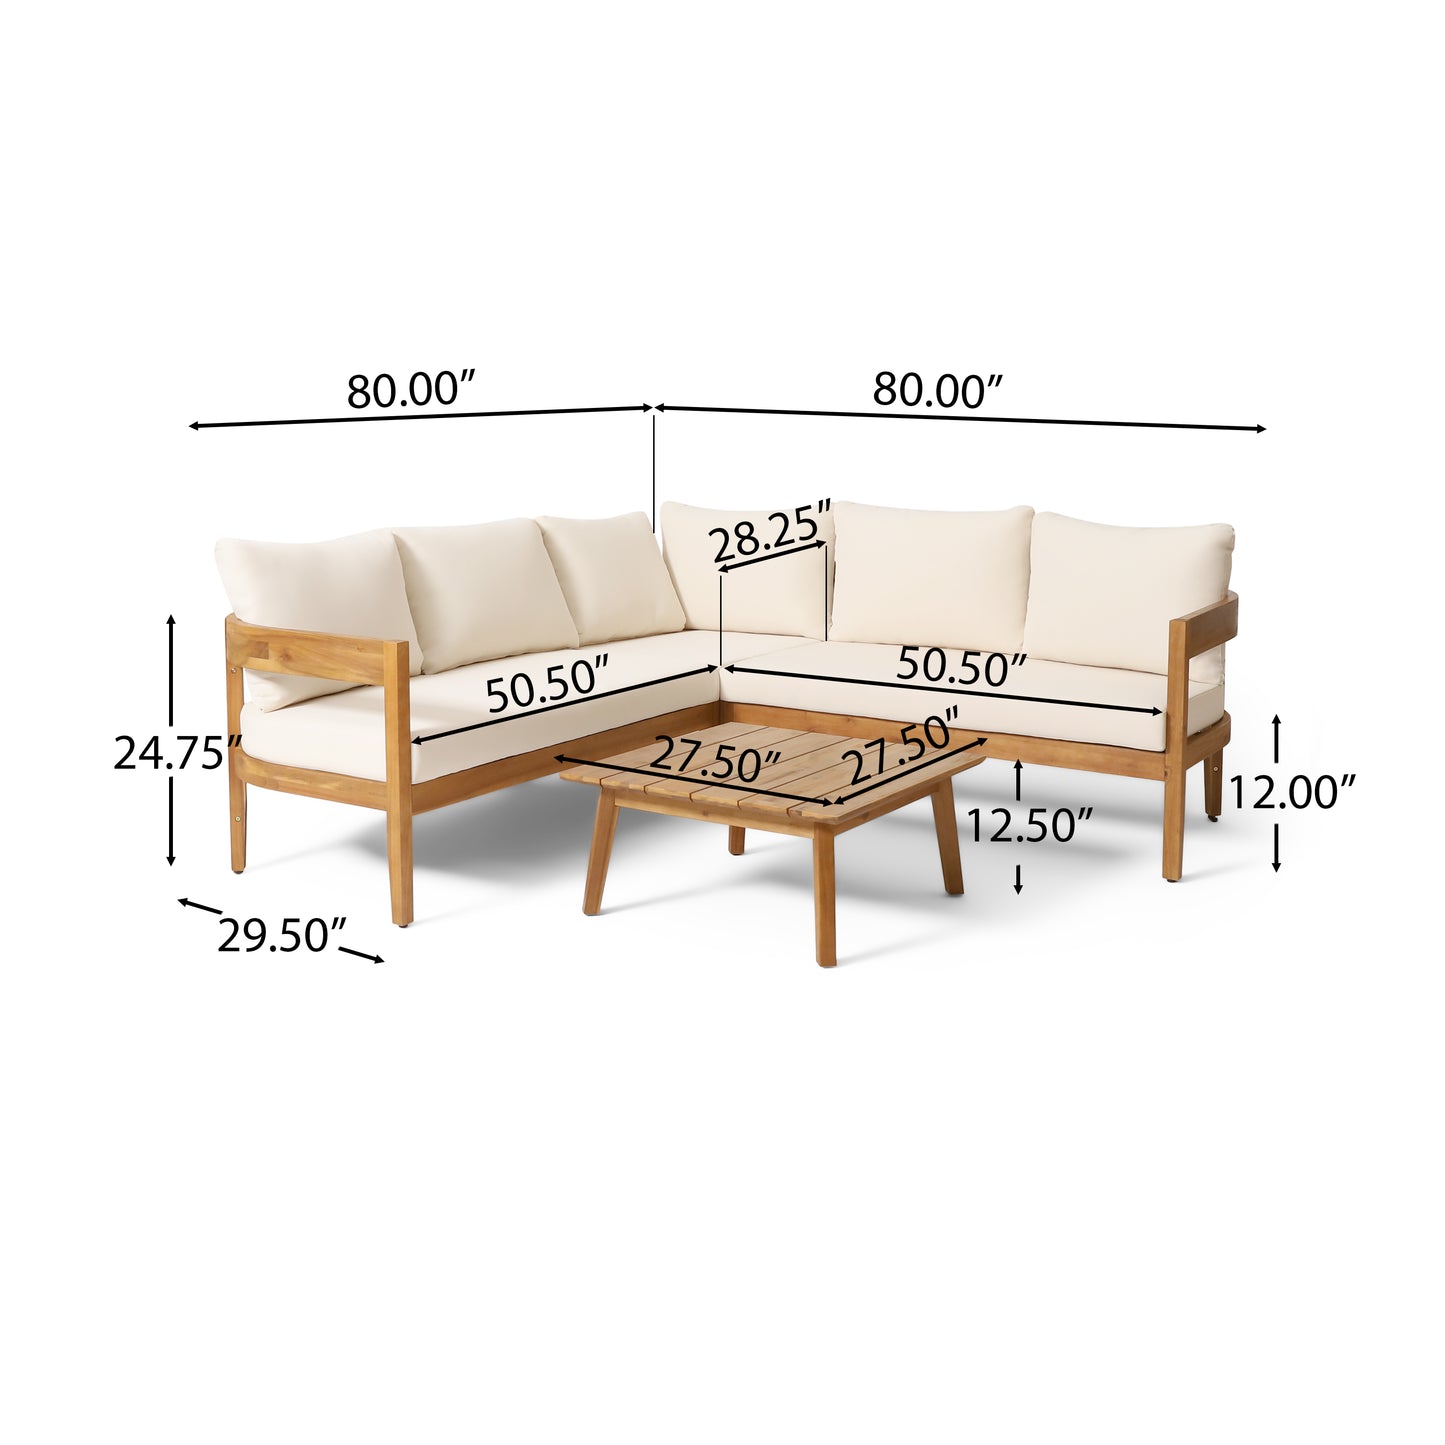 Brooklyn Outdoor Acacia Wood 5 Seater Sectional Sofa Chat Set with Cushions, Teak and Beige